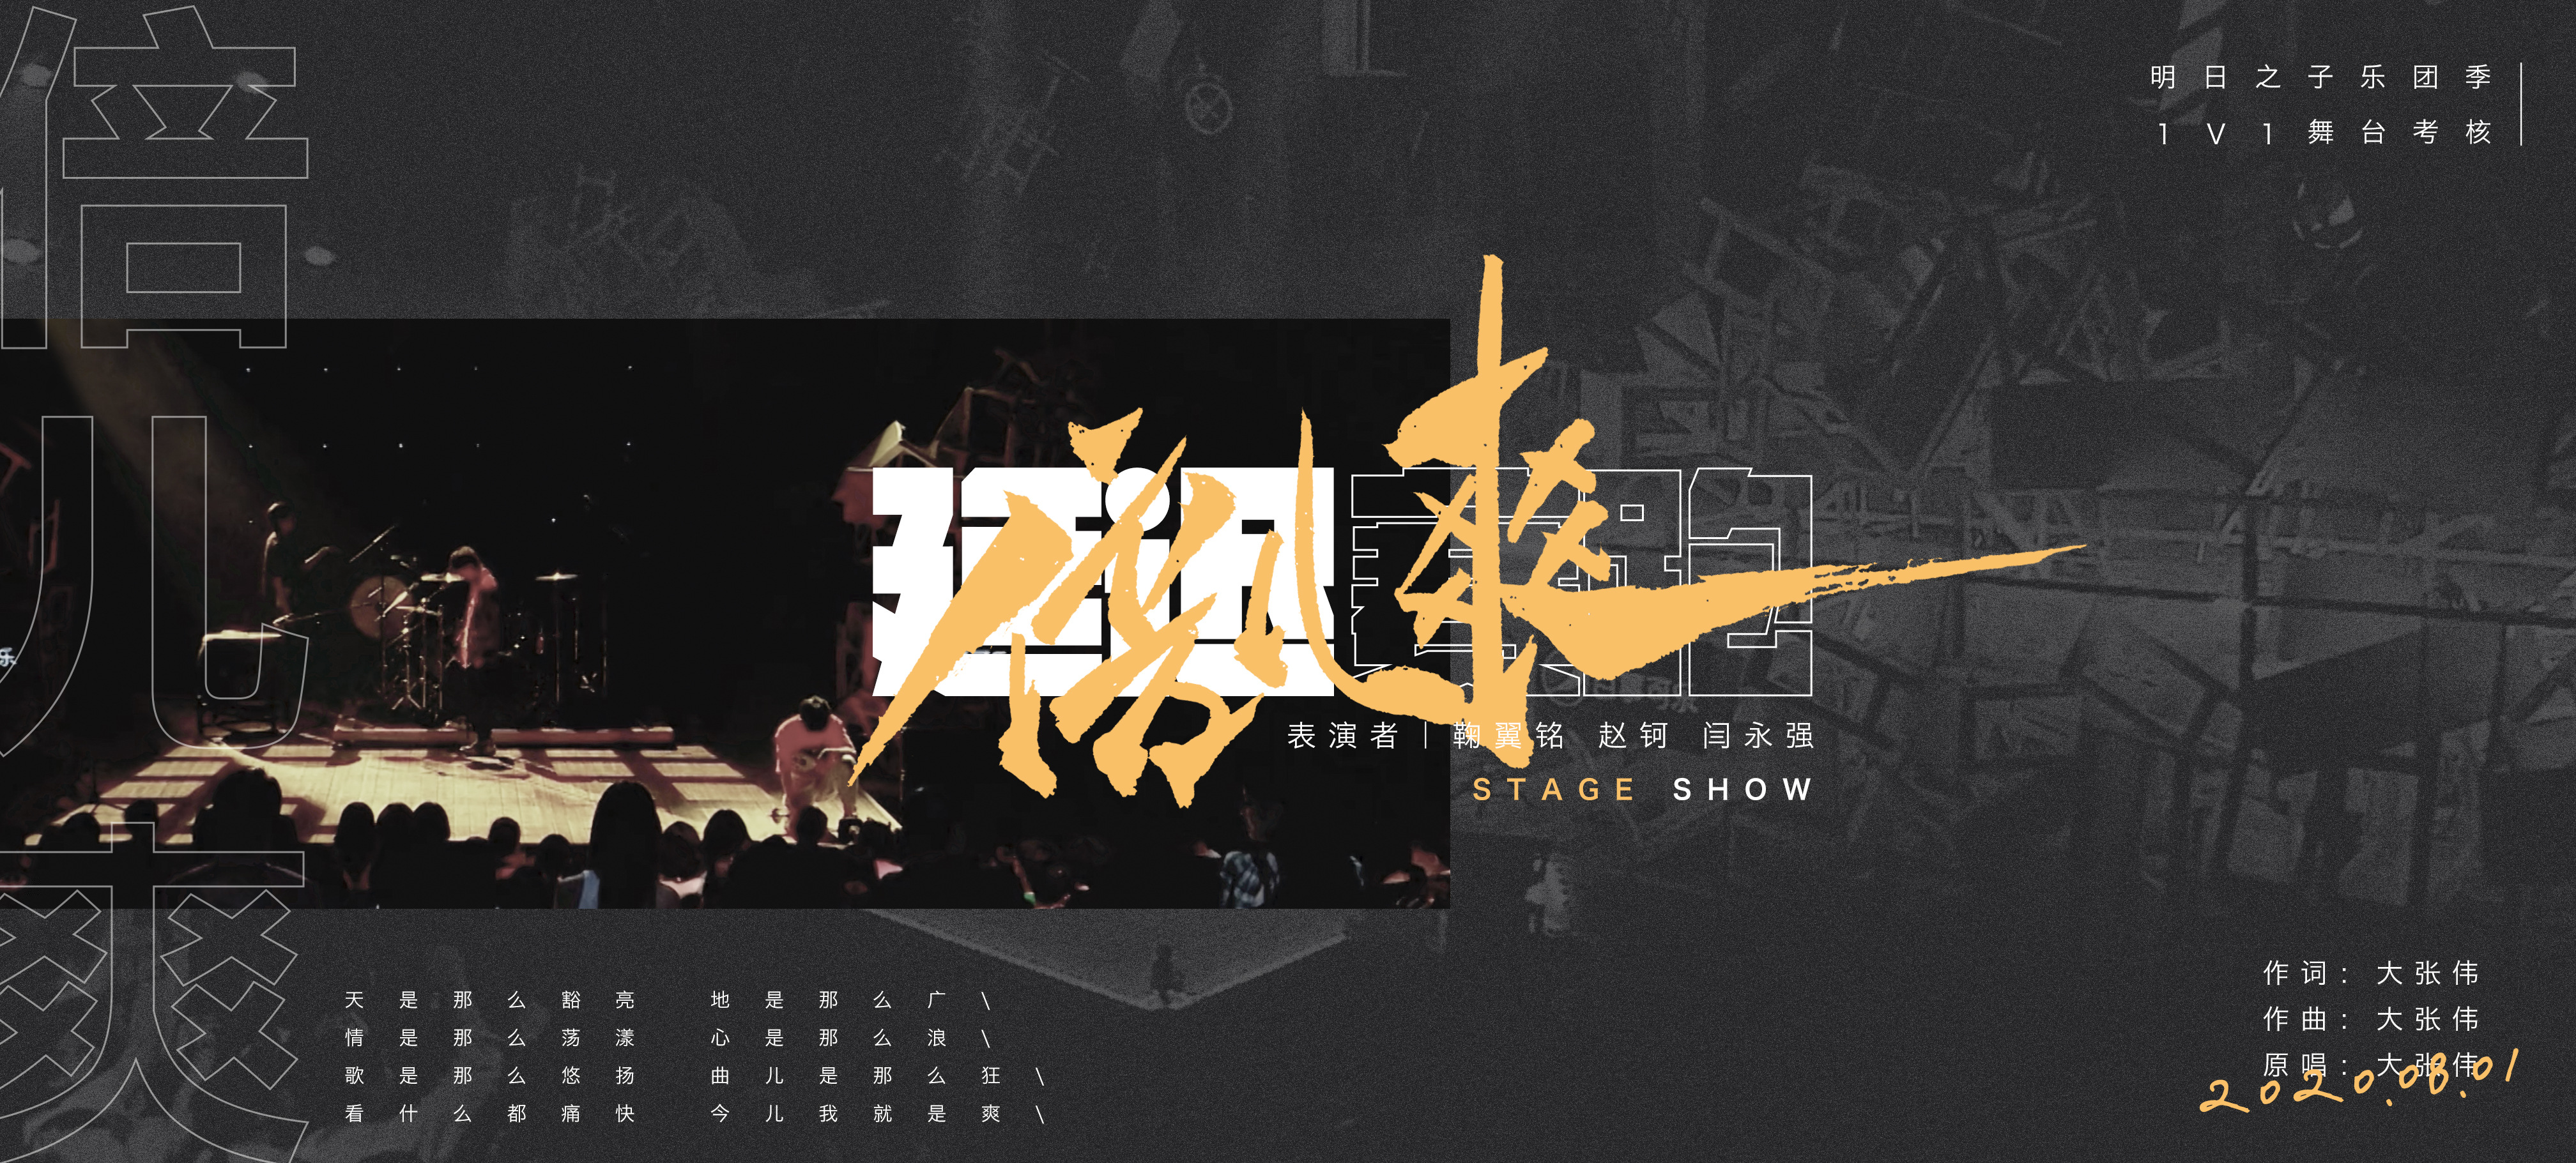 Chinese Creative Writing Brush Font Design-August song nickname